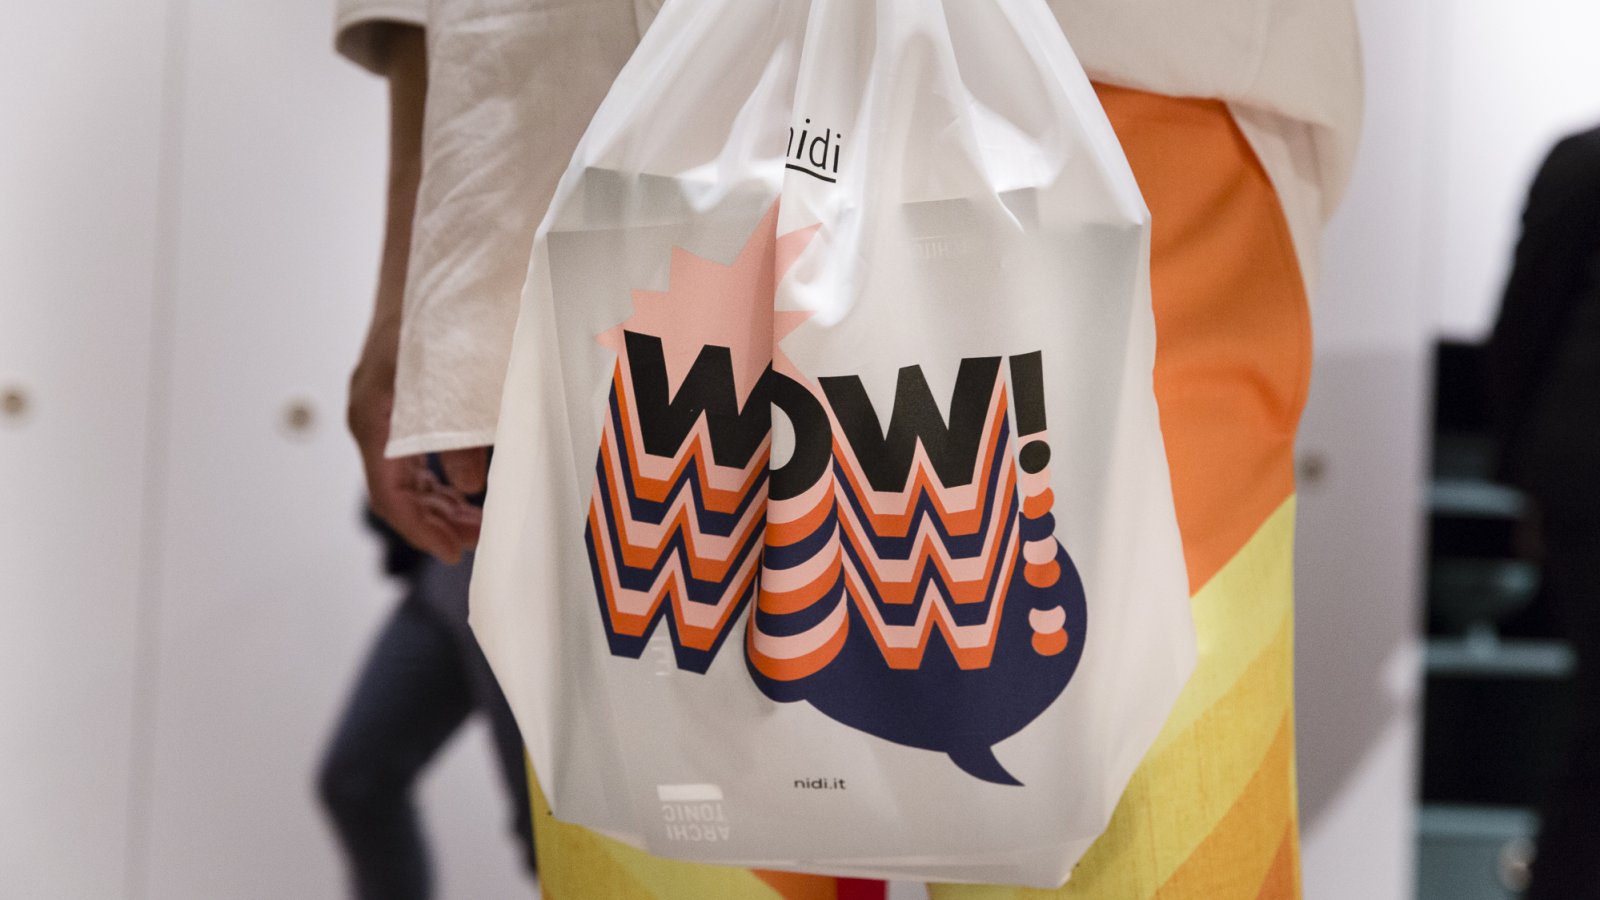 MILANO DESIGN WEEK 2019 – WOW: NOW THAT'S WHAT I CALL NEW!